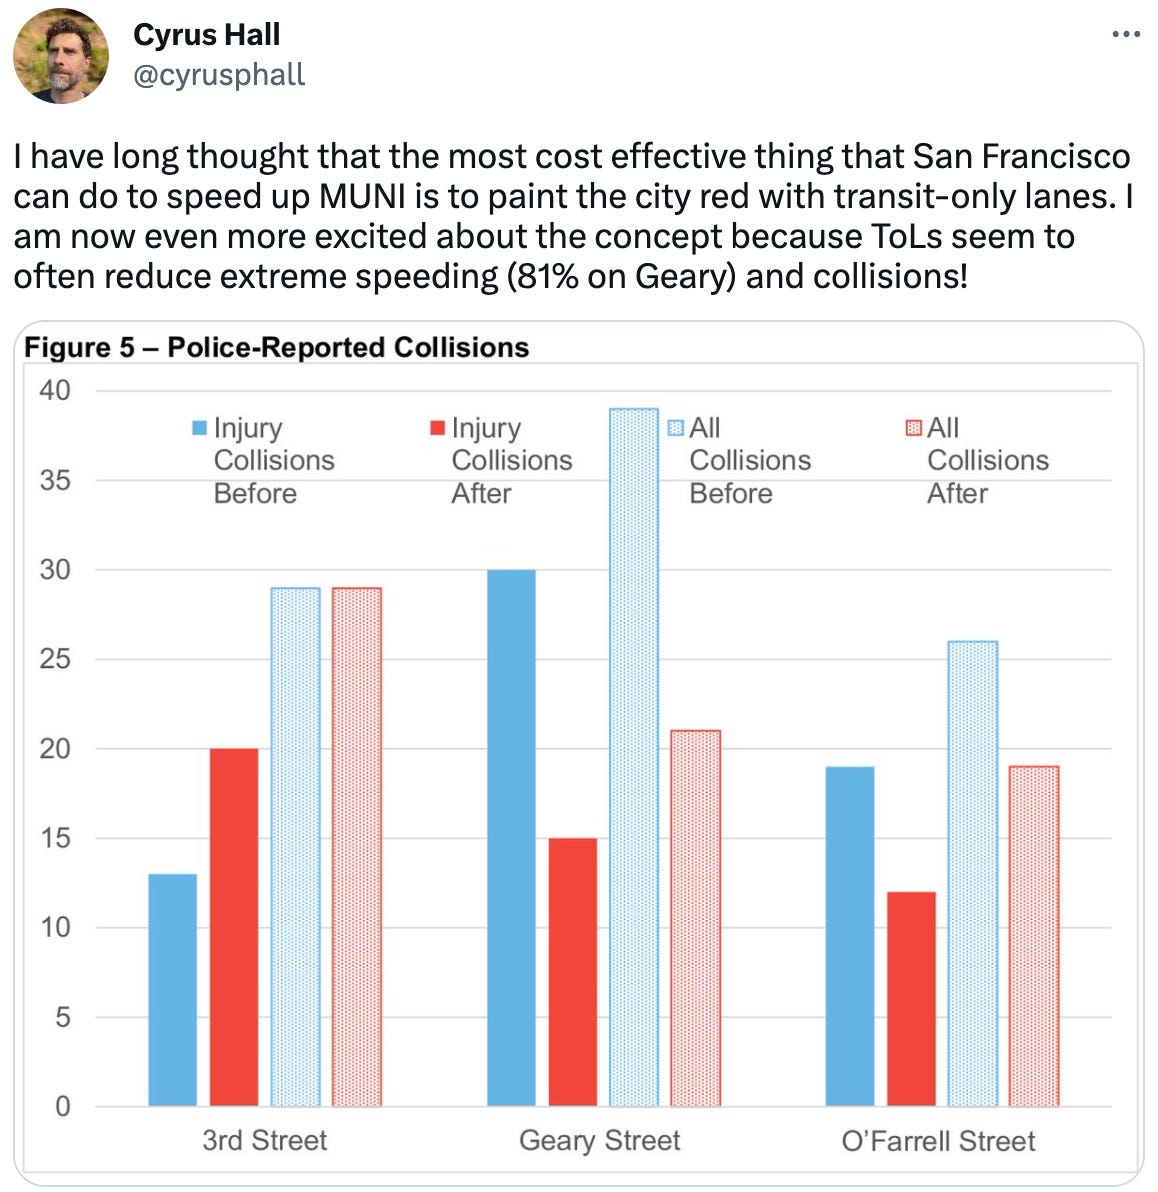  See new Tweets Conversation Cyrus Hall @cyrusphall I have long thought that the most cost effective thing that San Francisco can do to speed up MUNI is to paint the city red with transit-only lanes. I am now even more excited about the concept because ToLs seem to  often reduce extreme speeding (81% on Geary) and collisions!